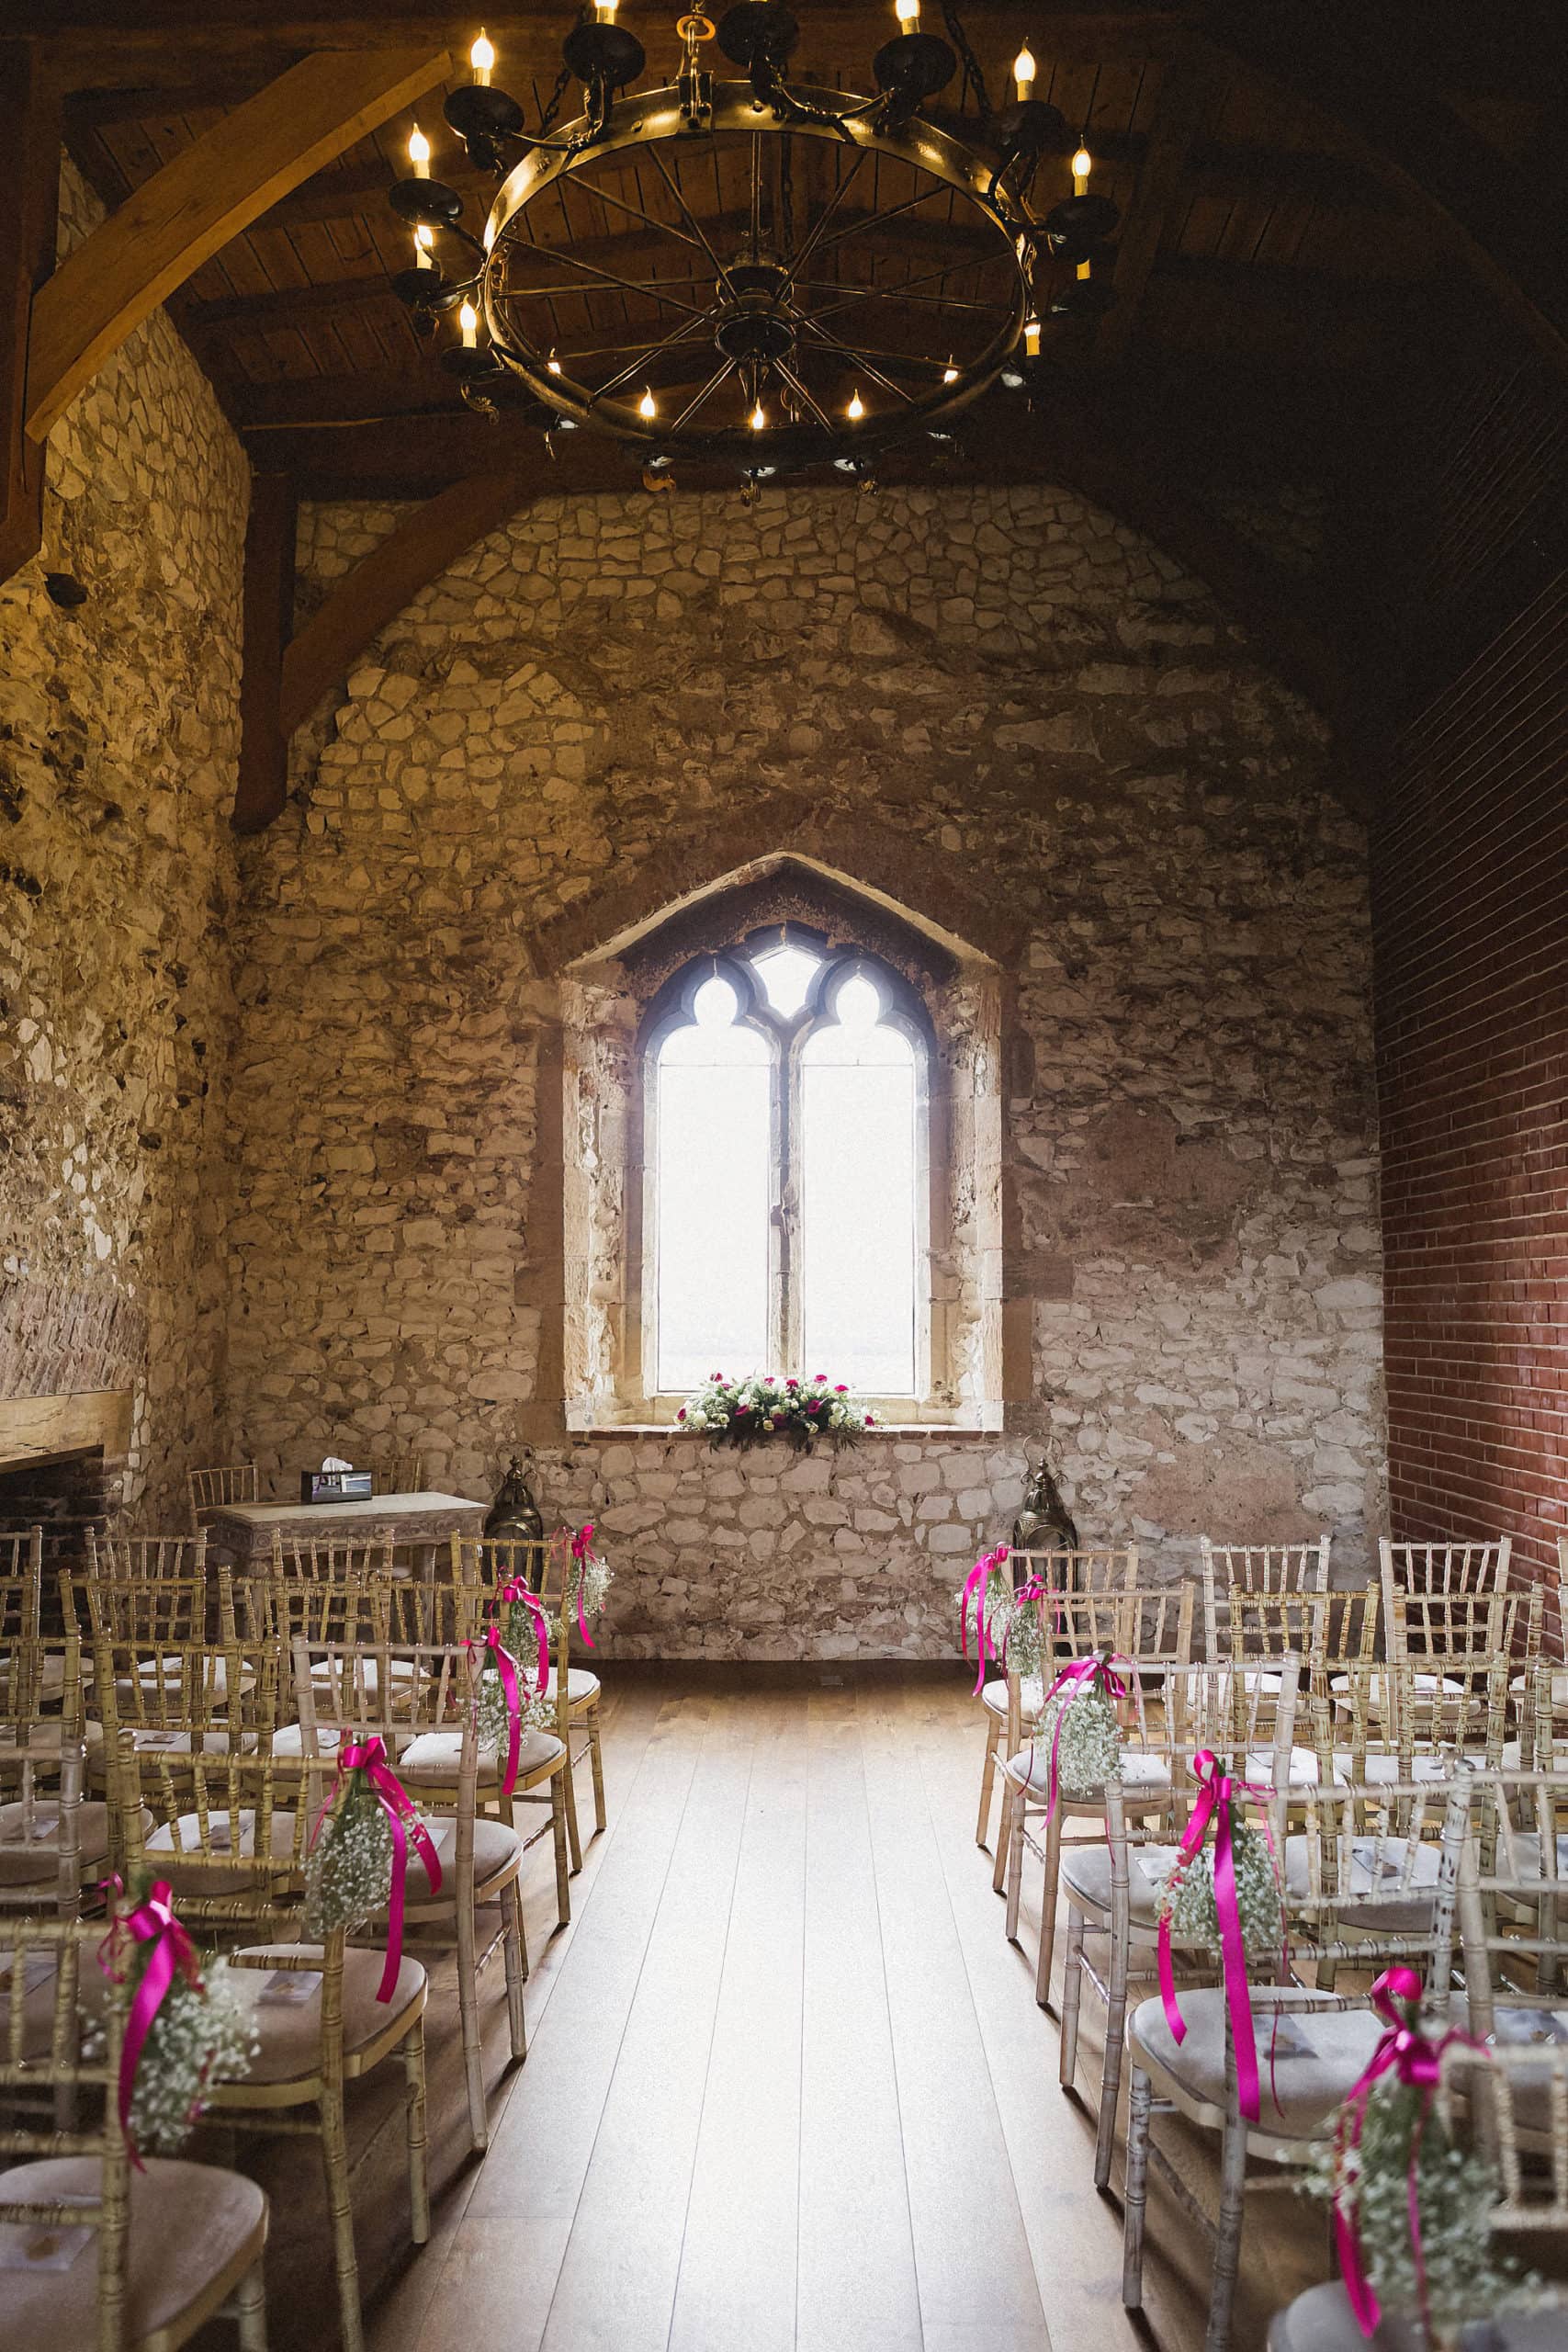 inside pentney abbey set up ready for a wedding ceremony. stone walls. white chairs. flowers lining the aisle